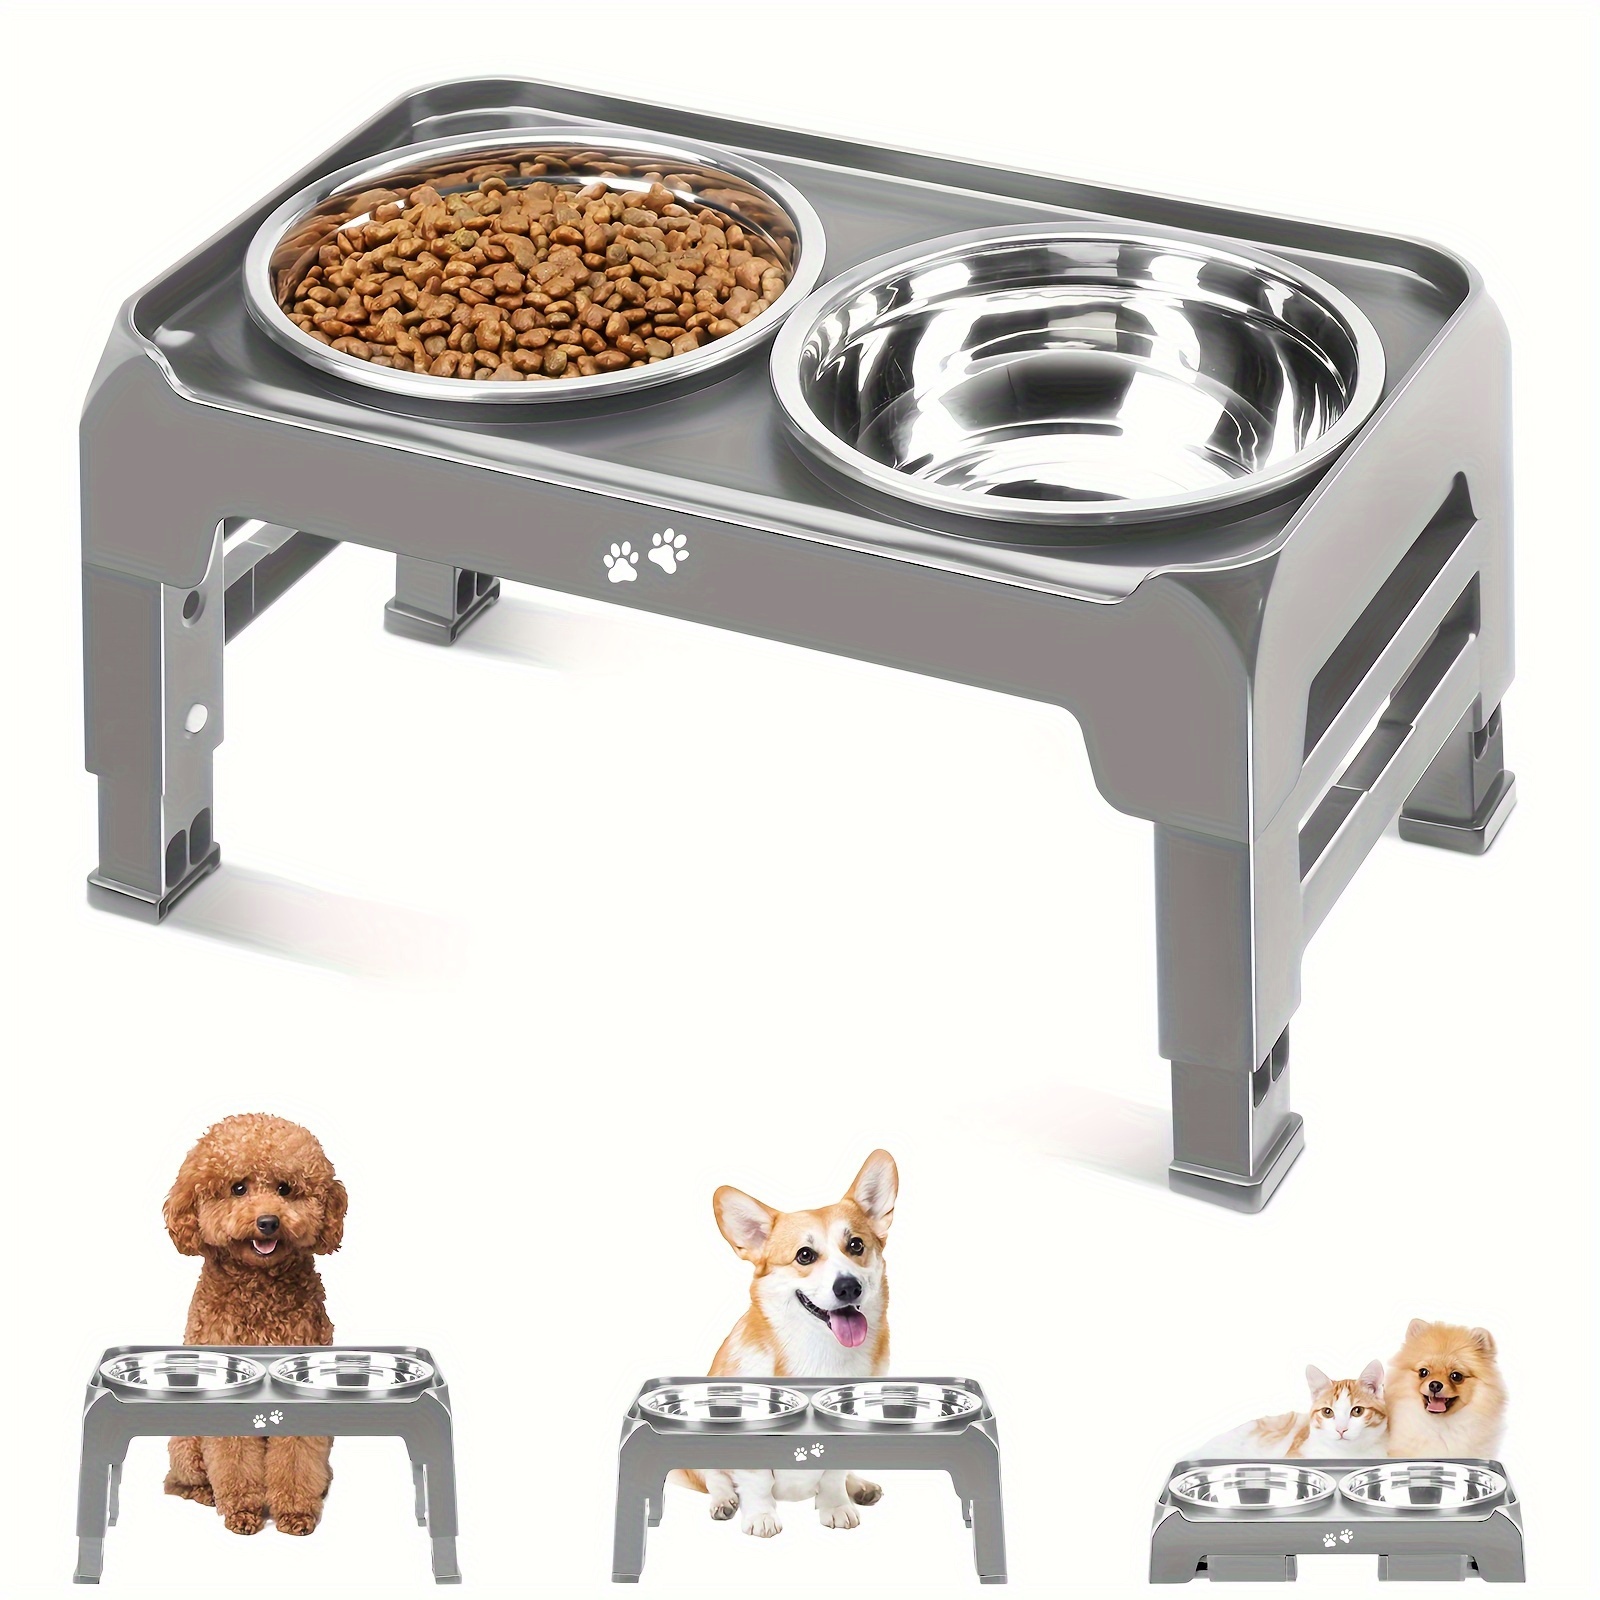 

Elevated Dog Bowls With 3 Adjustable Height, Raised Dog Bowl Stand With 2 Thick Stainless Steel Dog Food Bowls, Non-slip Dog Feeder For Small Medium Dogs